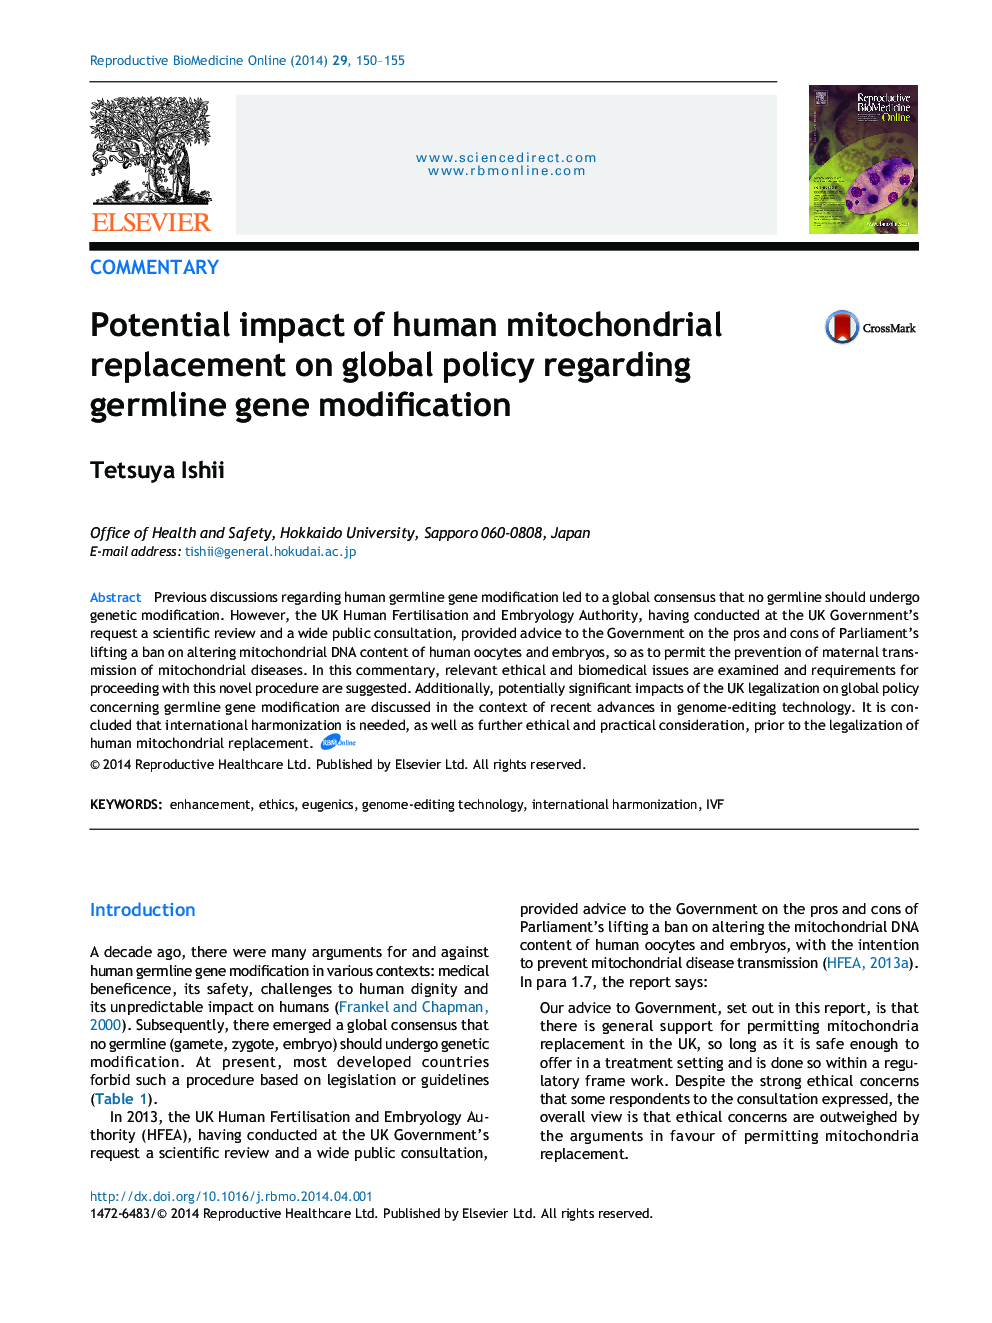 Potential impact of human mitochondrial replacement on global policy regarding germline gene modification